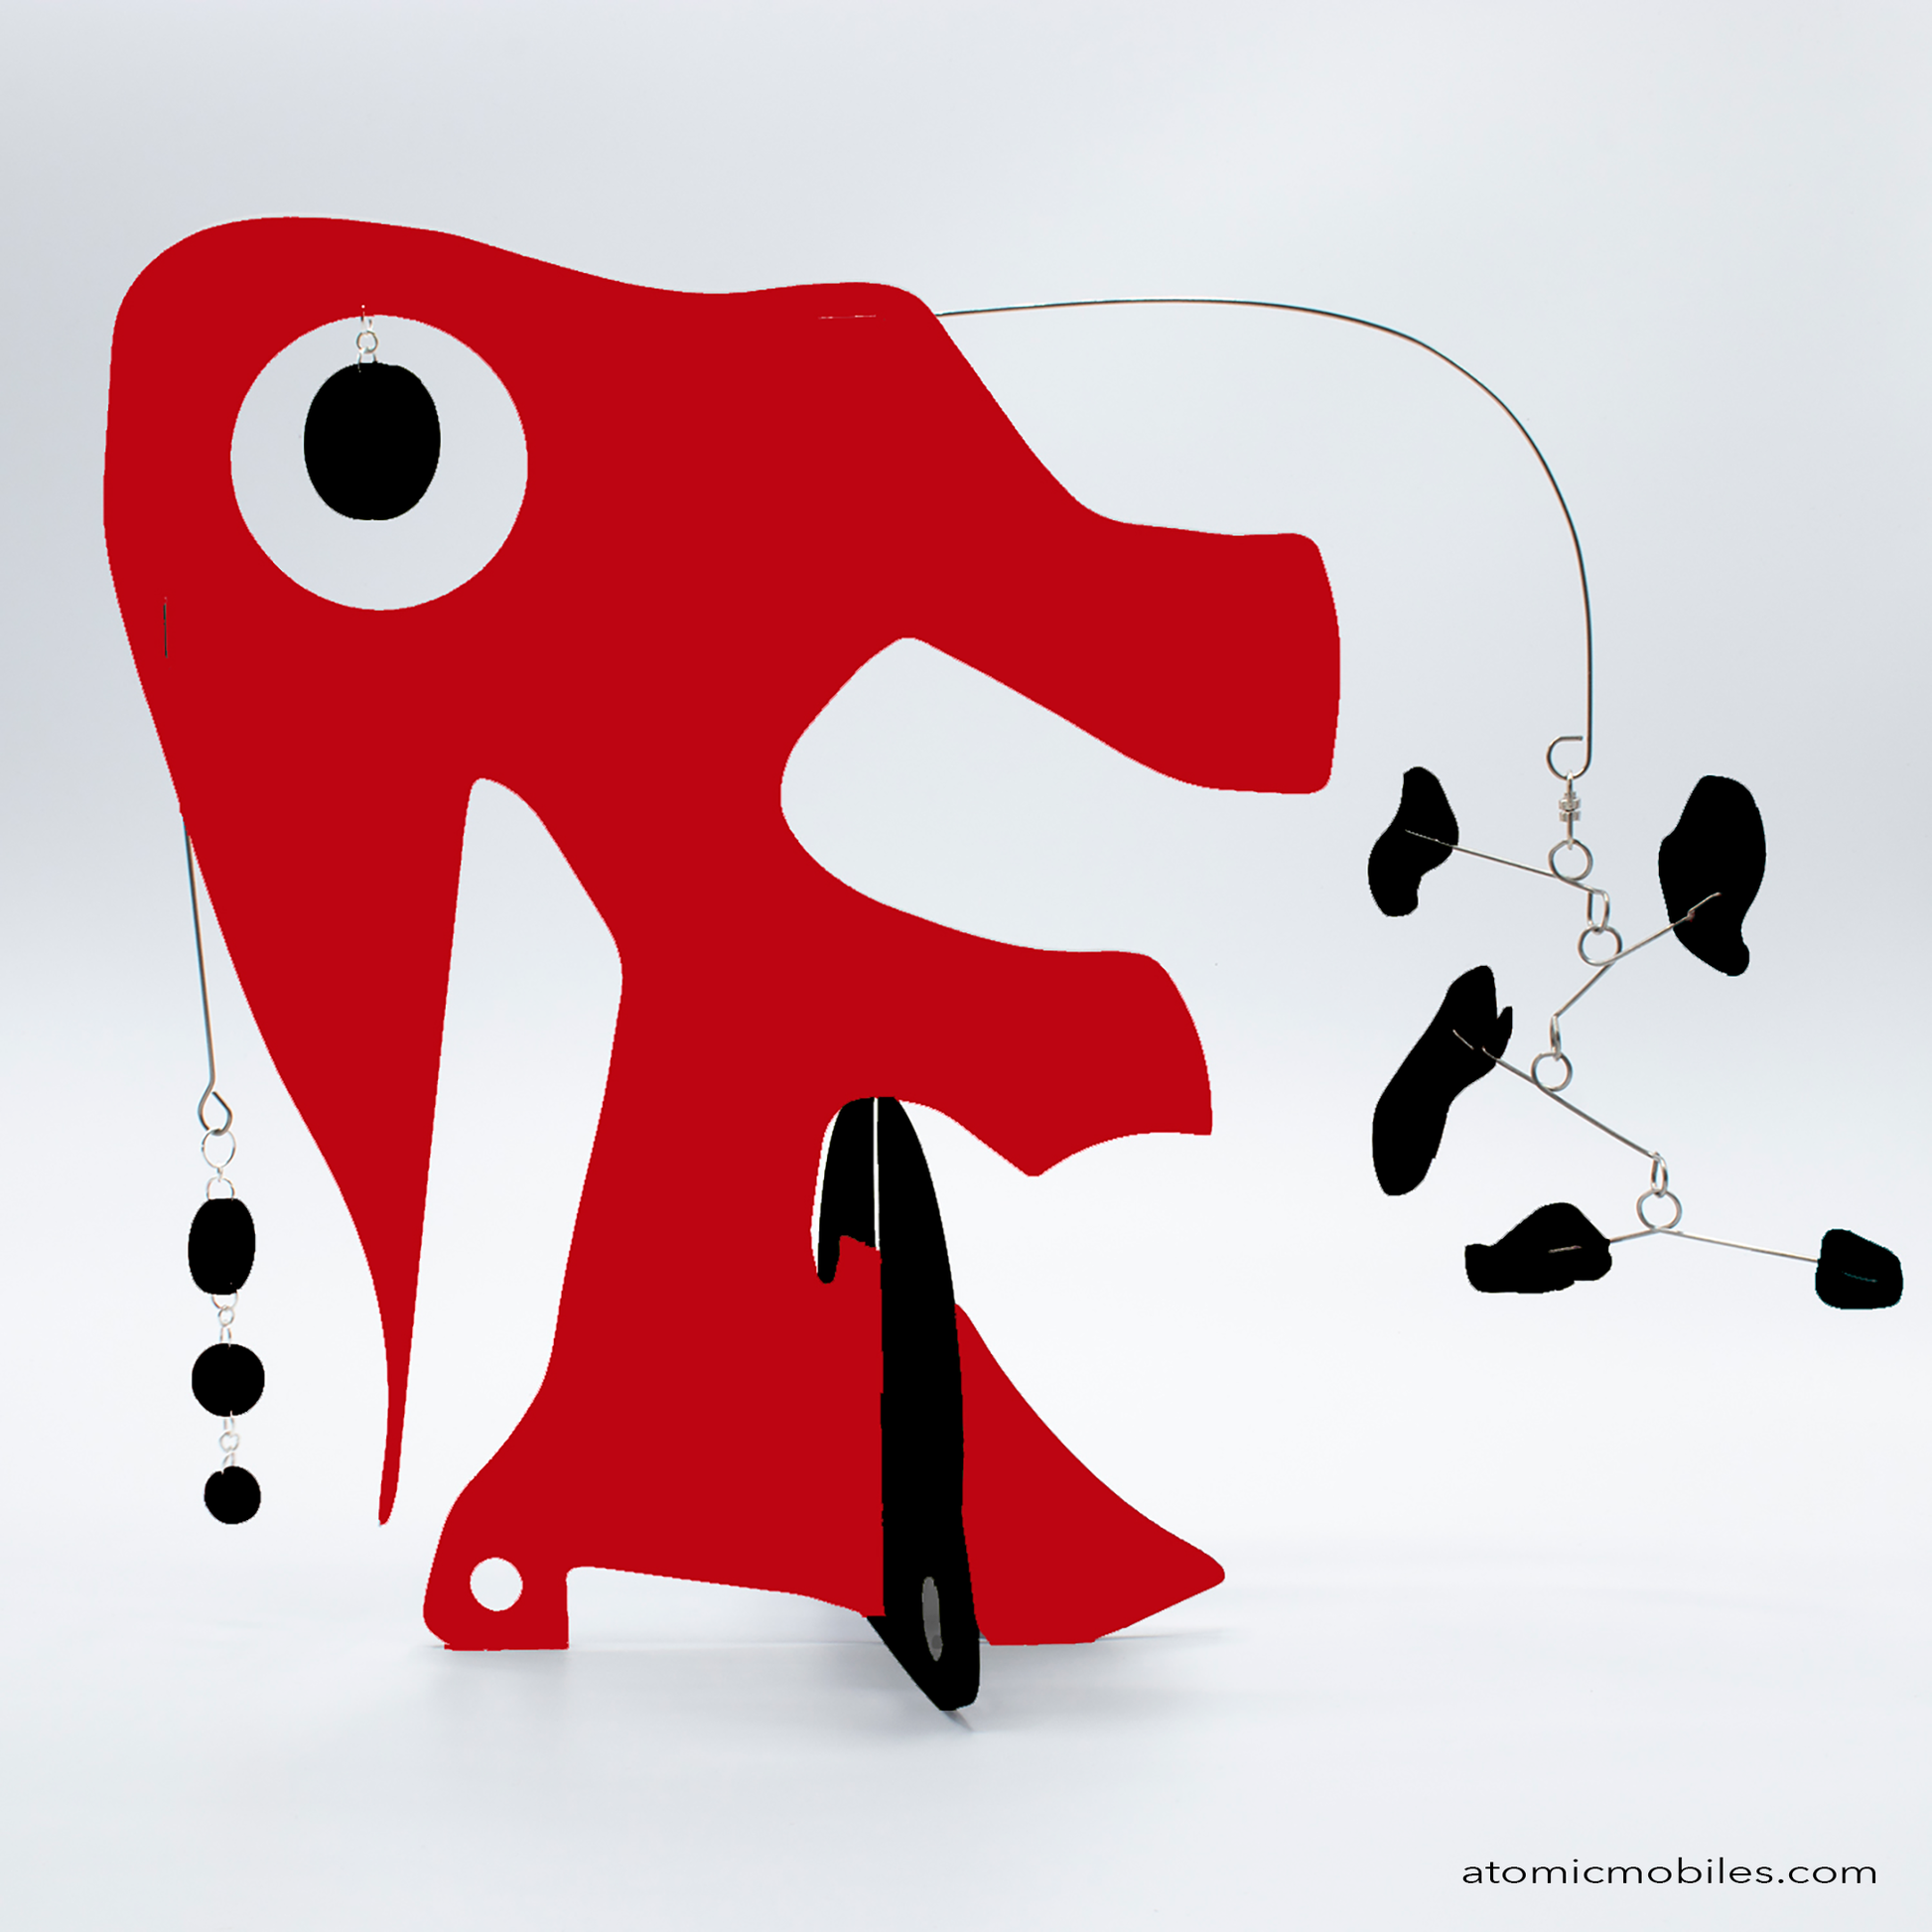 KinetiCats Collection Elephant in Red and Black - one of 12 Modern Cute Abstract Animal Art Sculpture Kinetic Stabiles inspired by Dada and mid century modern style art by AtomicMobiles.com